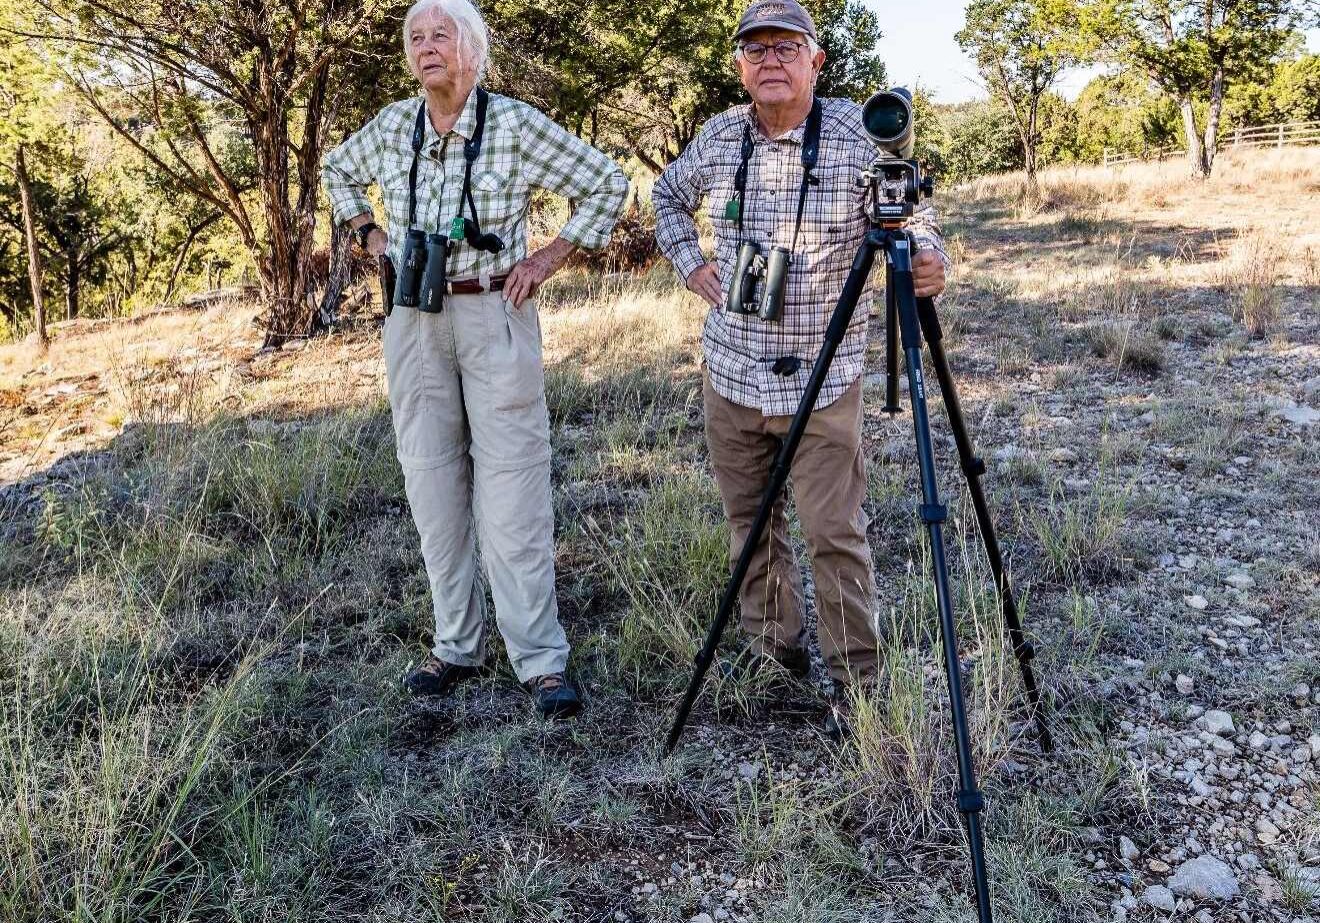 A man and woman standing in the grass with cameras.